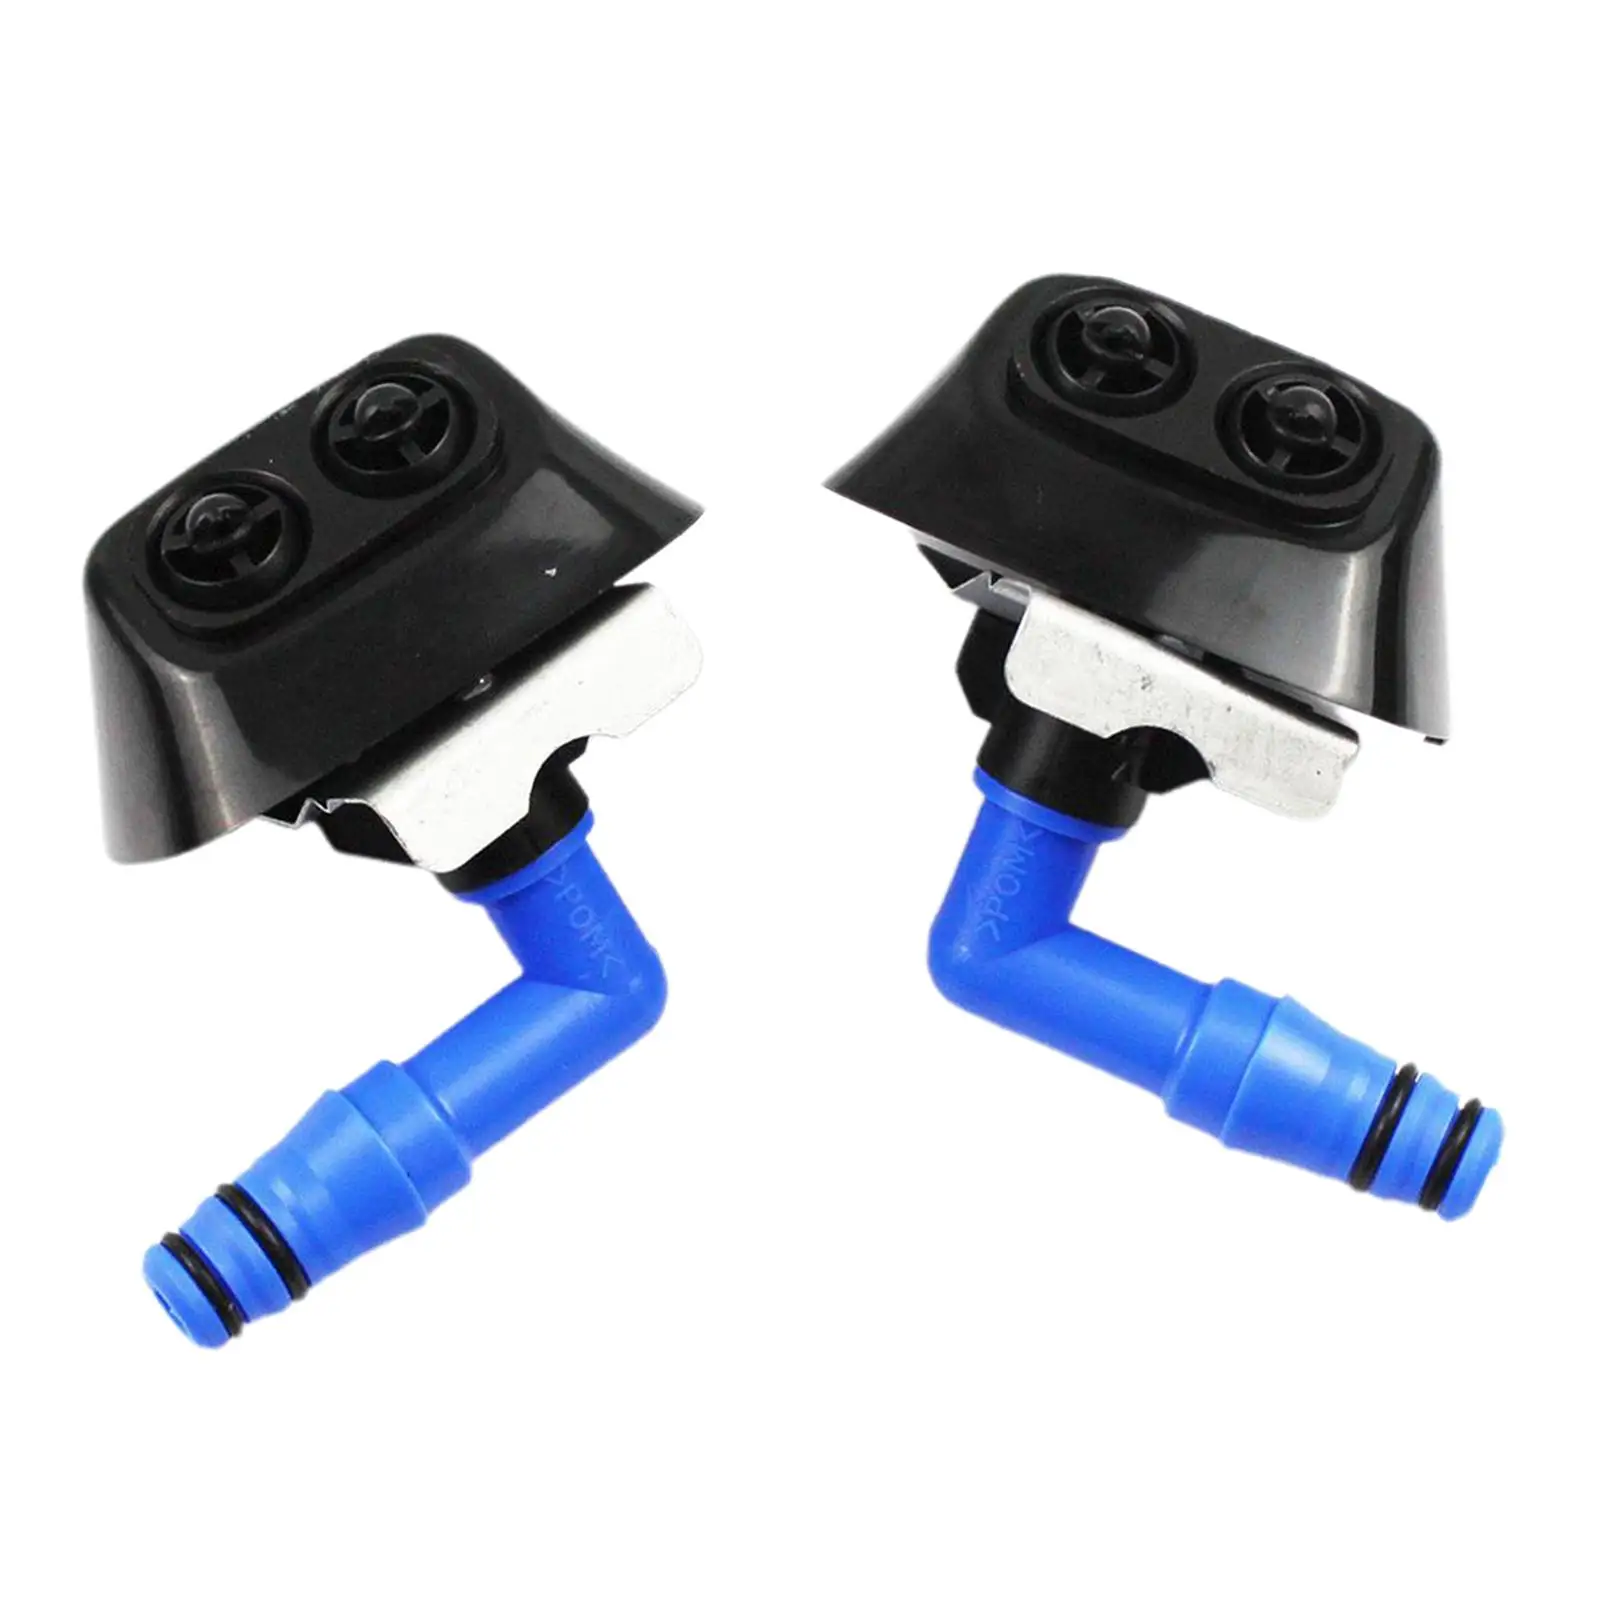 2pcs Front Left Right Headlight Washer Sprayer Nozzle Jet for Saab 93 03-12 12803972, Easy to Install